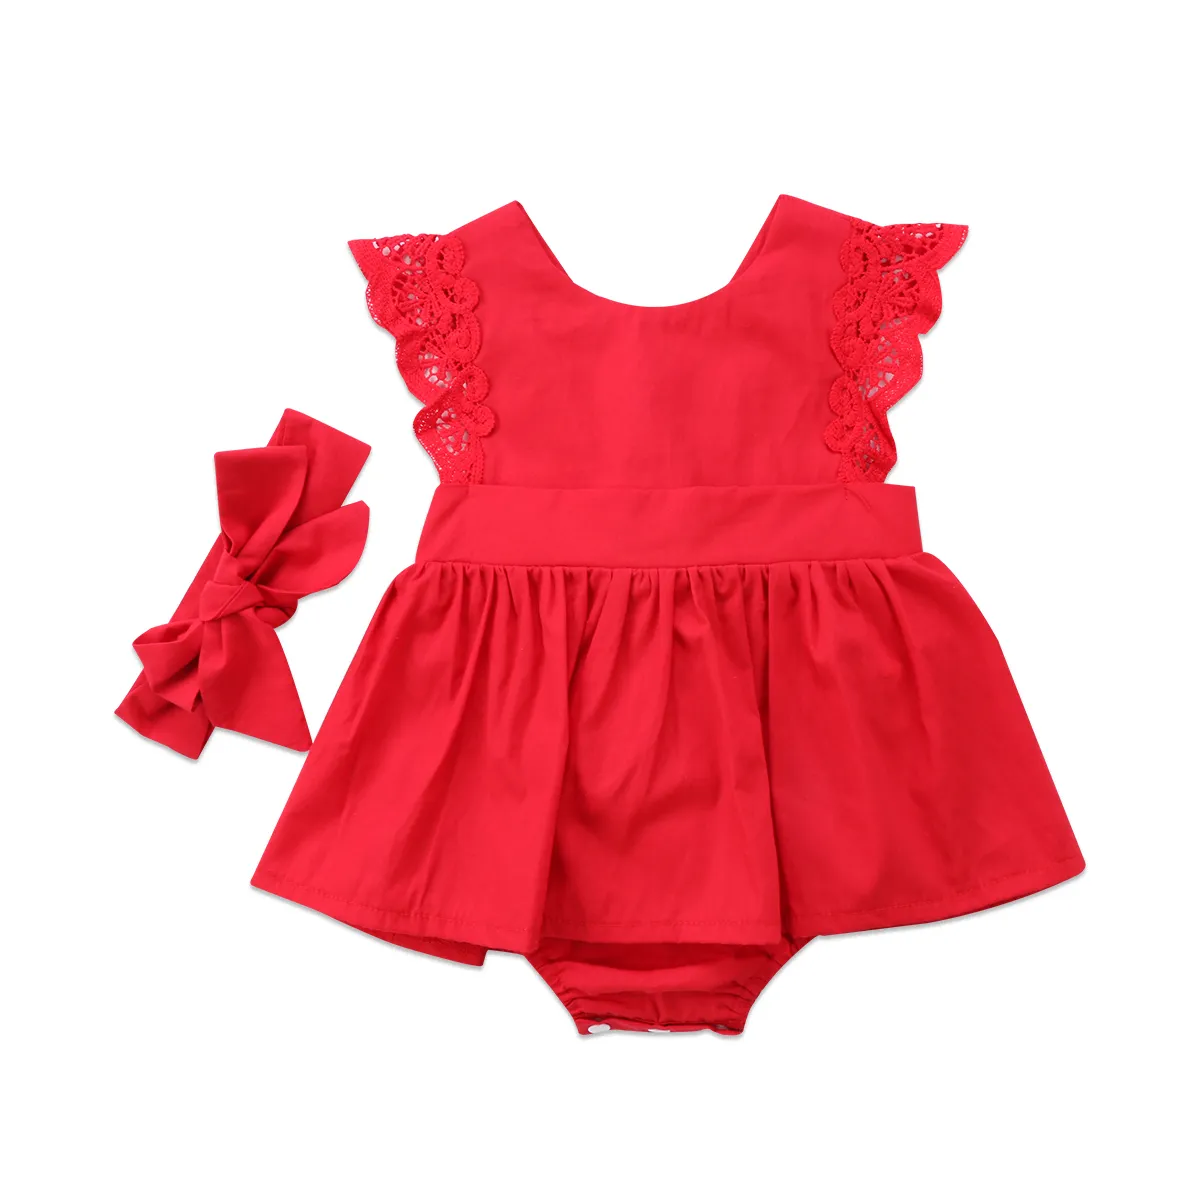 New Arriavl Christmas Ruffle Red Lace Romper Dress Baby Girls Sister Princess Kids Xmas Party Dresses Cotton Newborn Costume